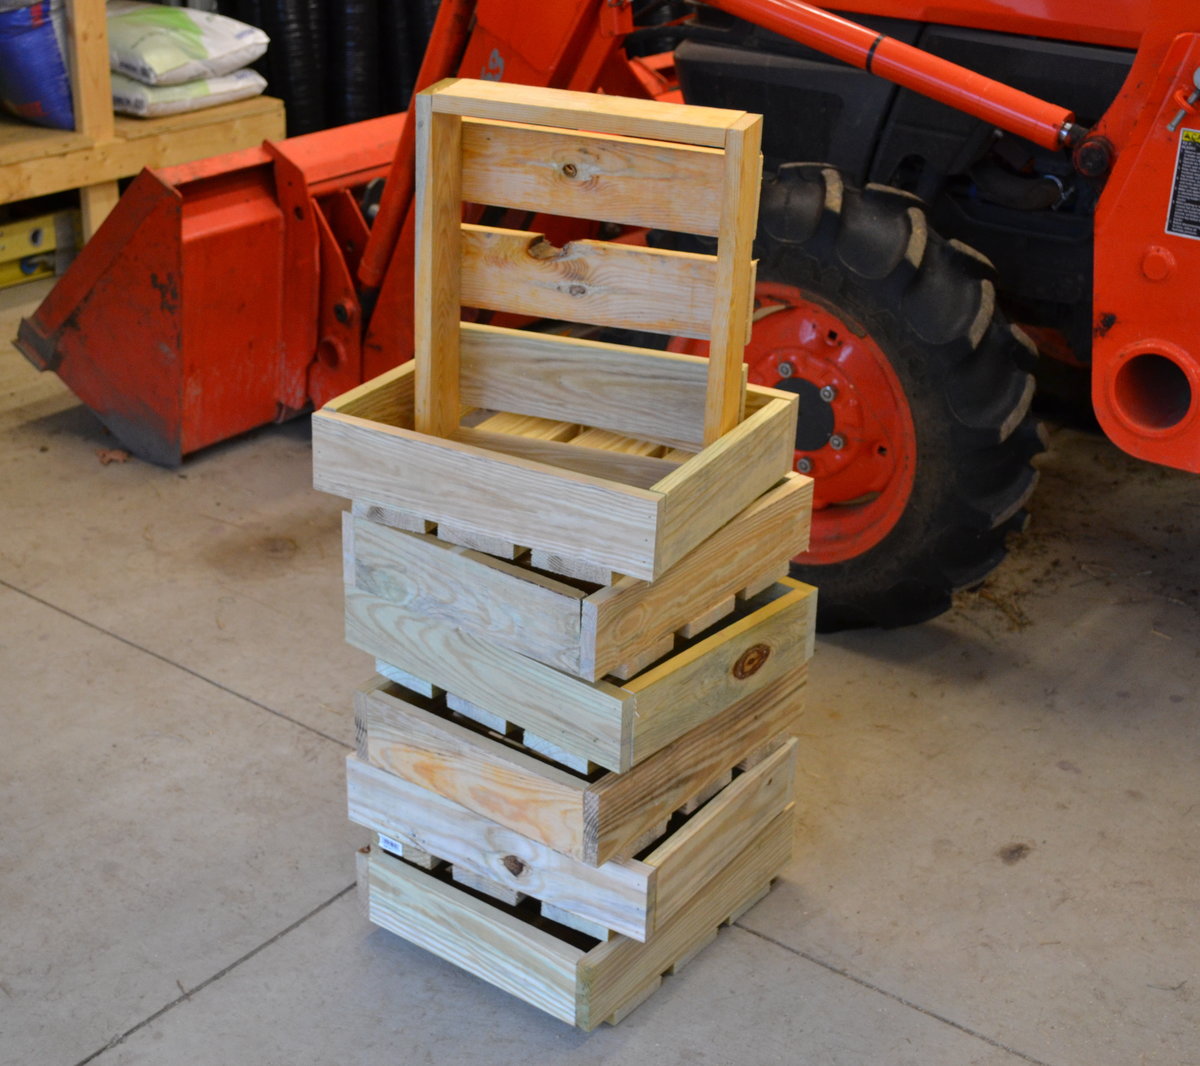 Homemade plant propagation flats stacked and ready to go!